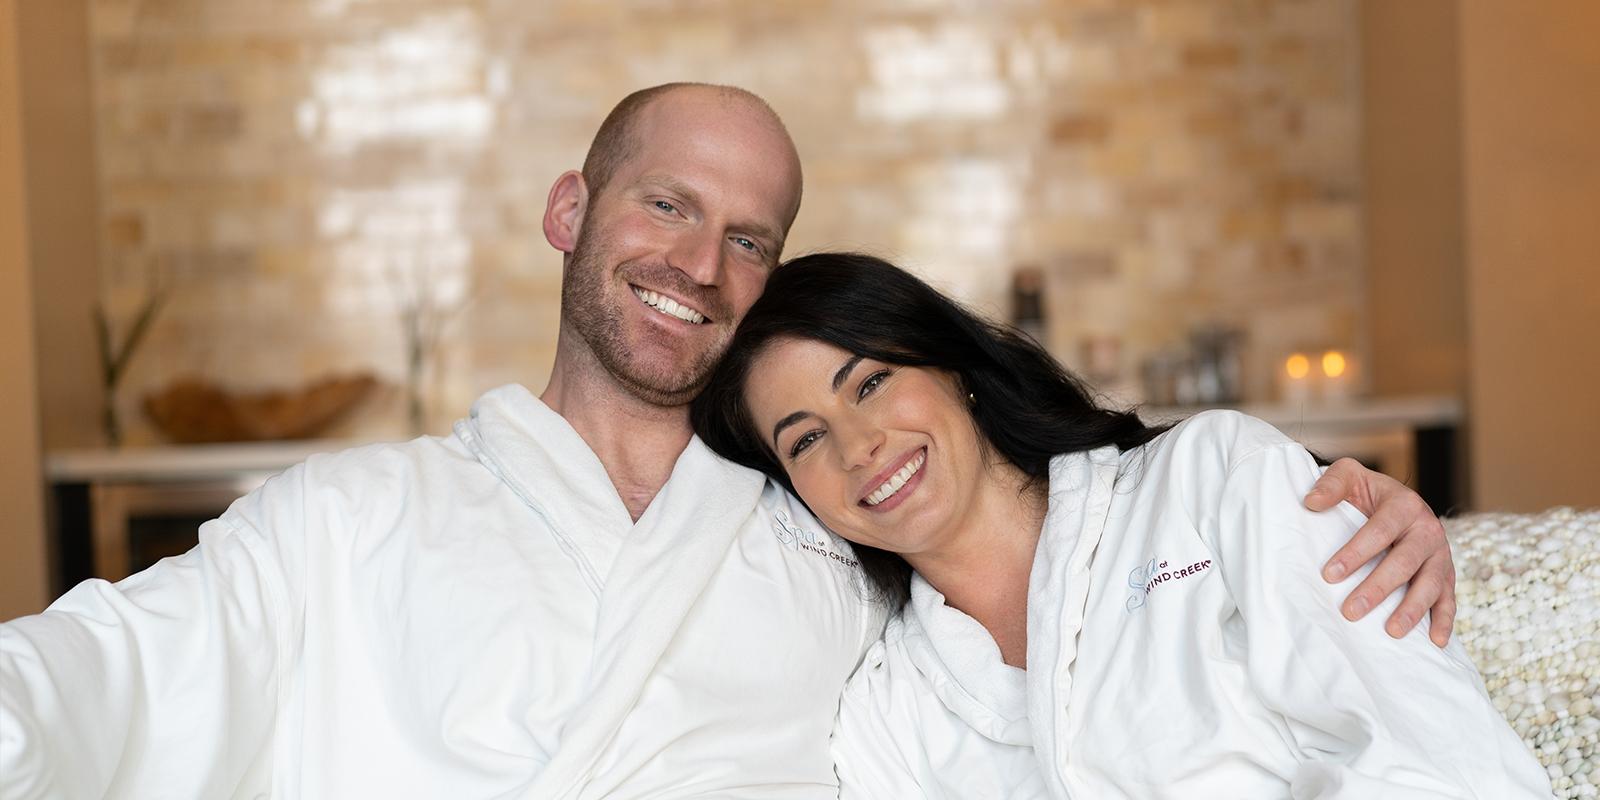 A smiling couple in a cozy, warm-toned spa room, both wearing white bathrobes and embracing each other